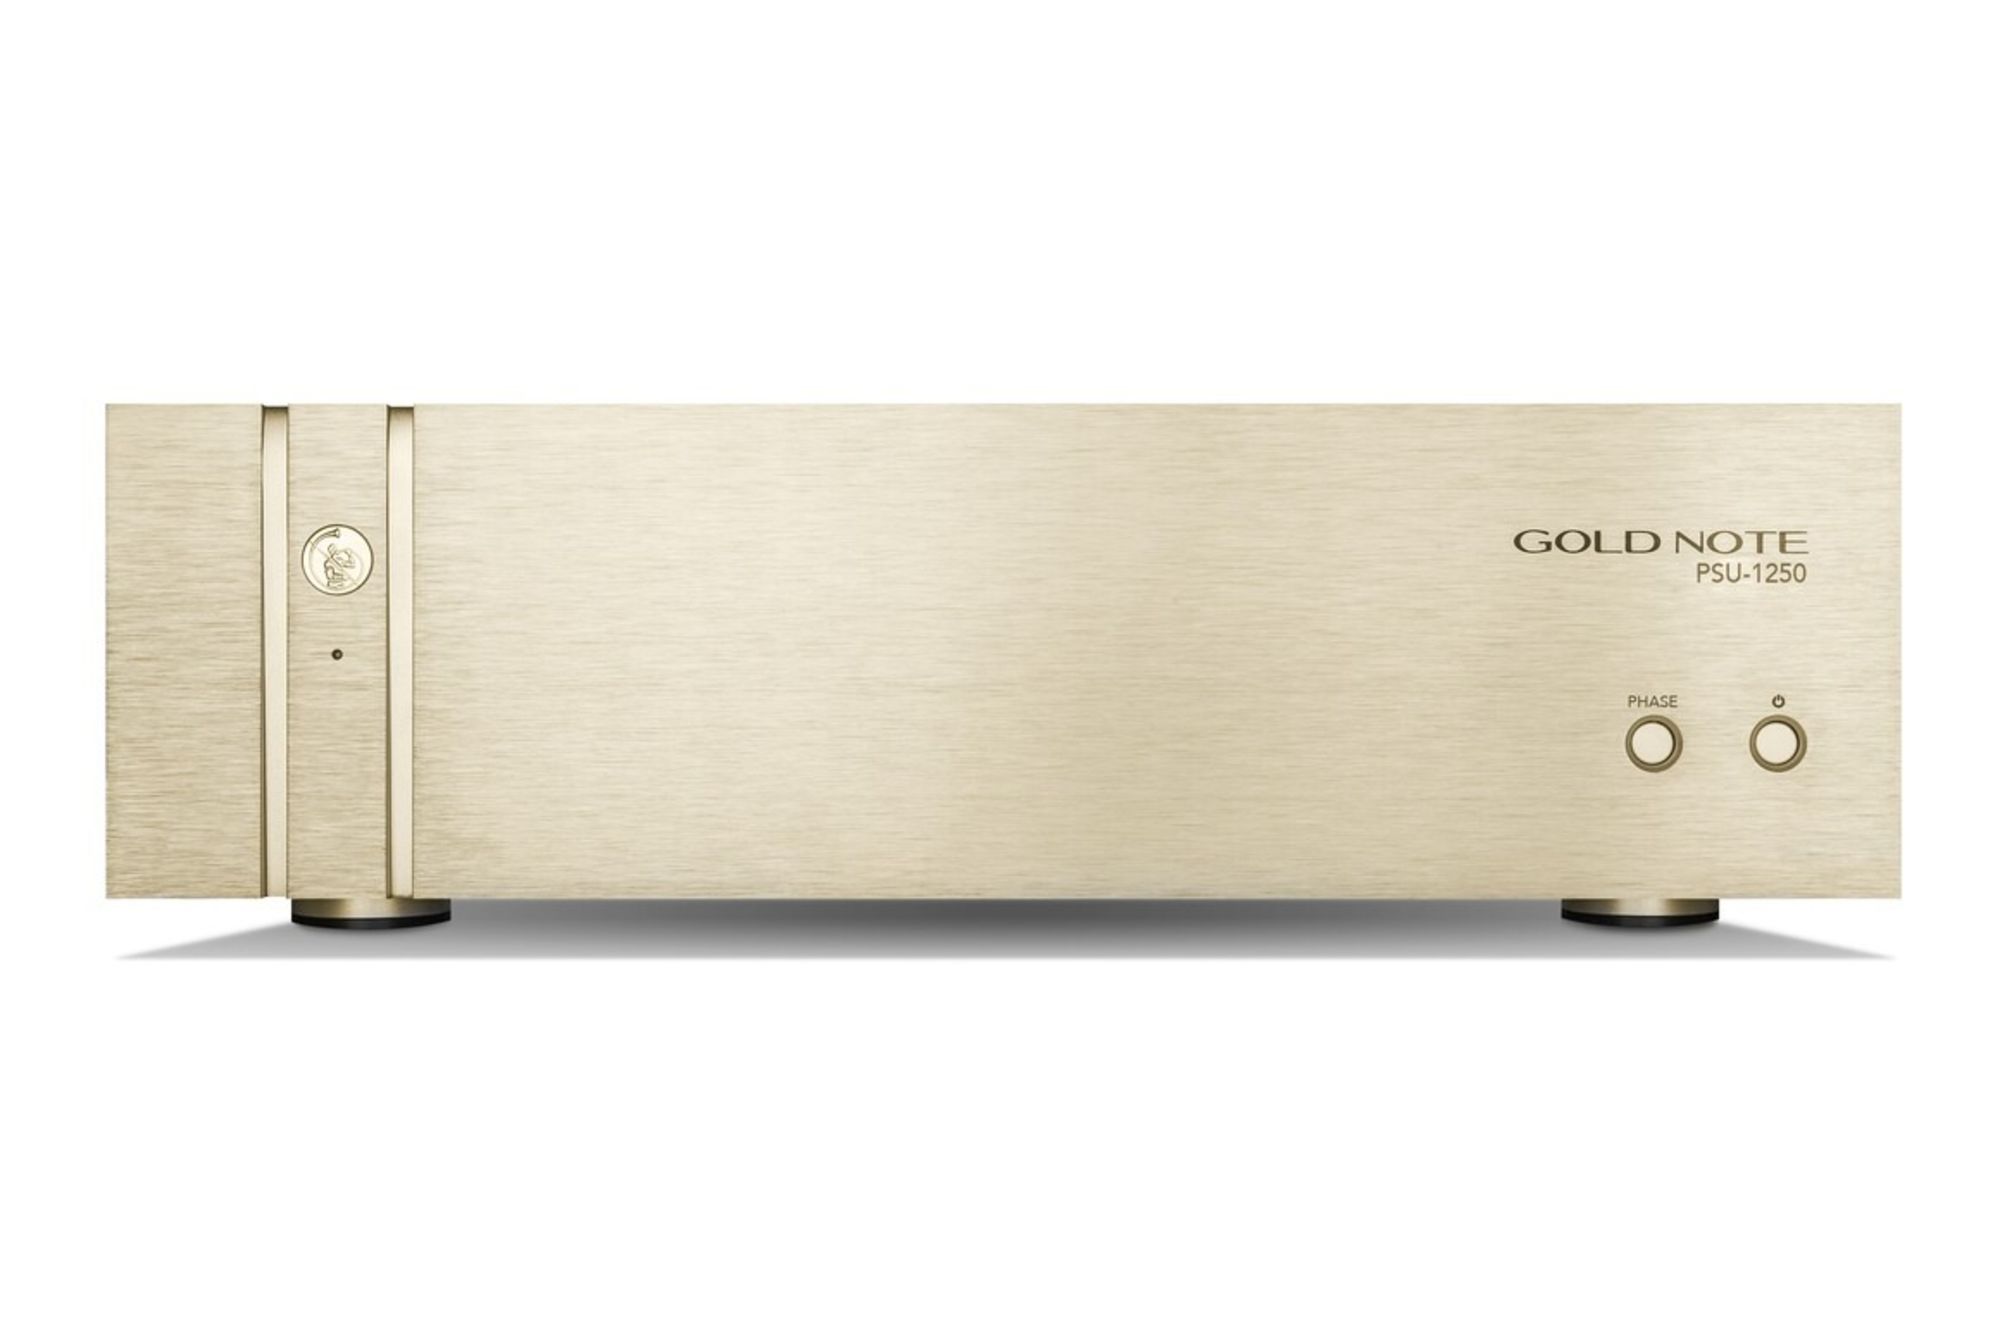 Блоки питания Gold Note PSU-1000 gold cd проигрыватели gold note cd 1000 deluxe mkii gold